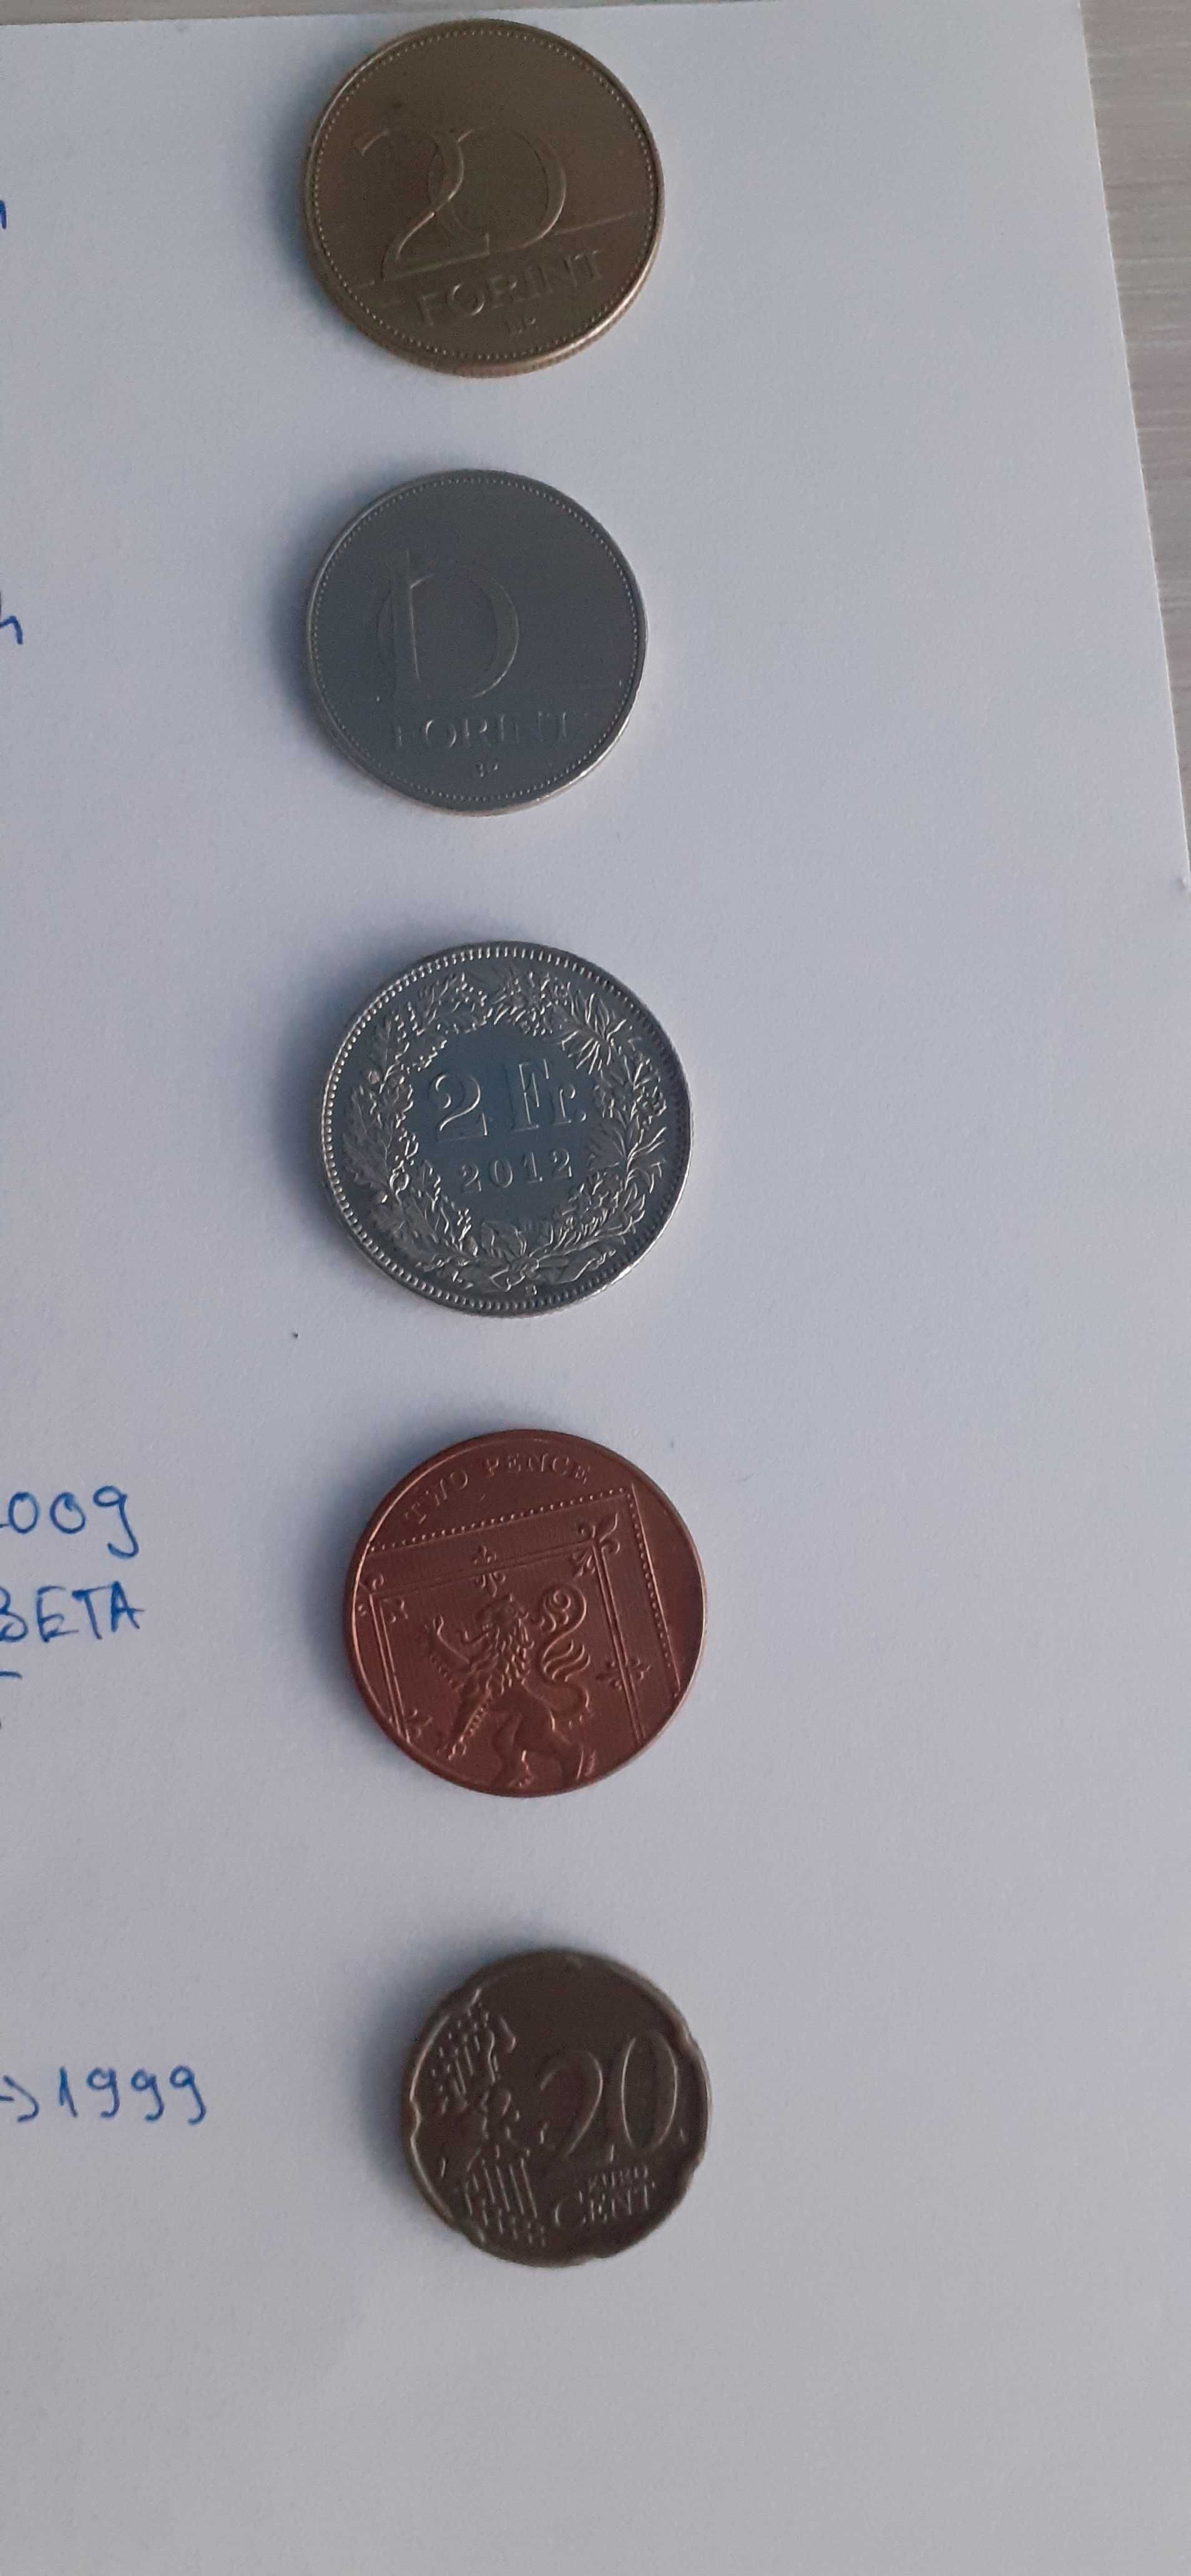 Monede colectie 10,20 forint, 2 fr, two pence, 20 euro, pret 1000 lei